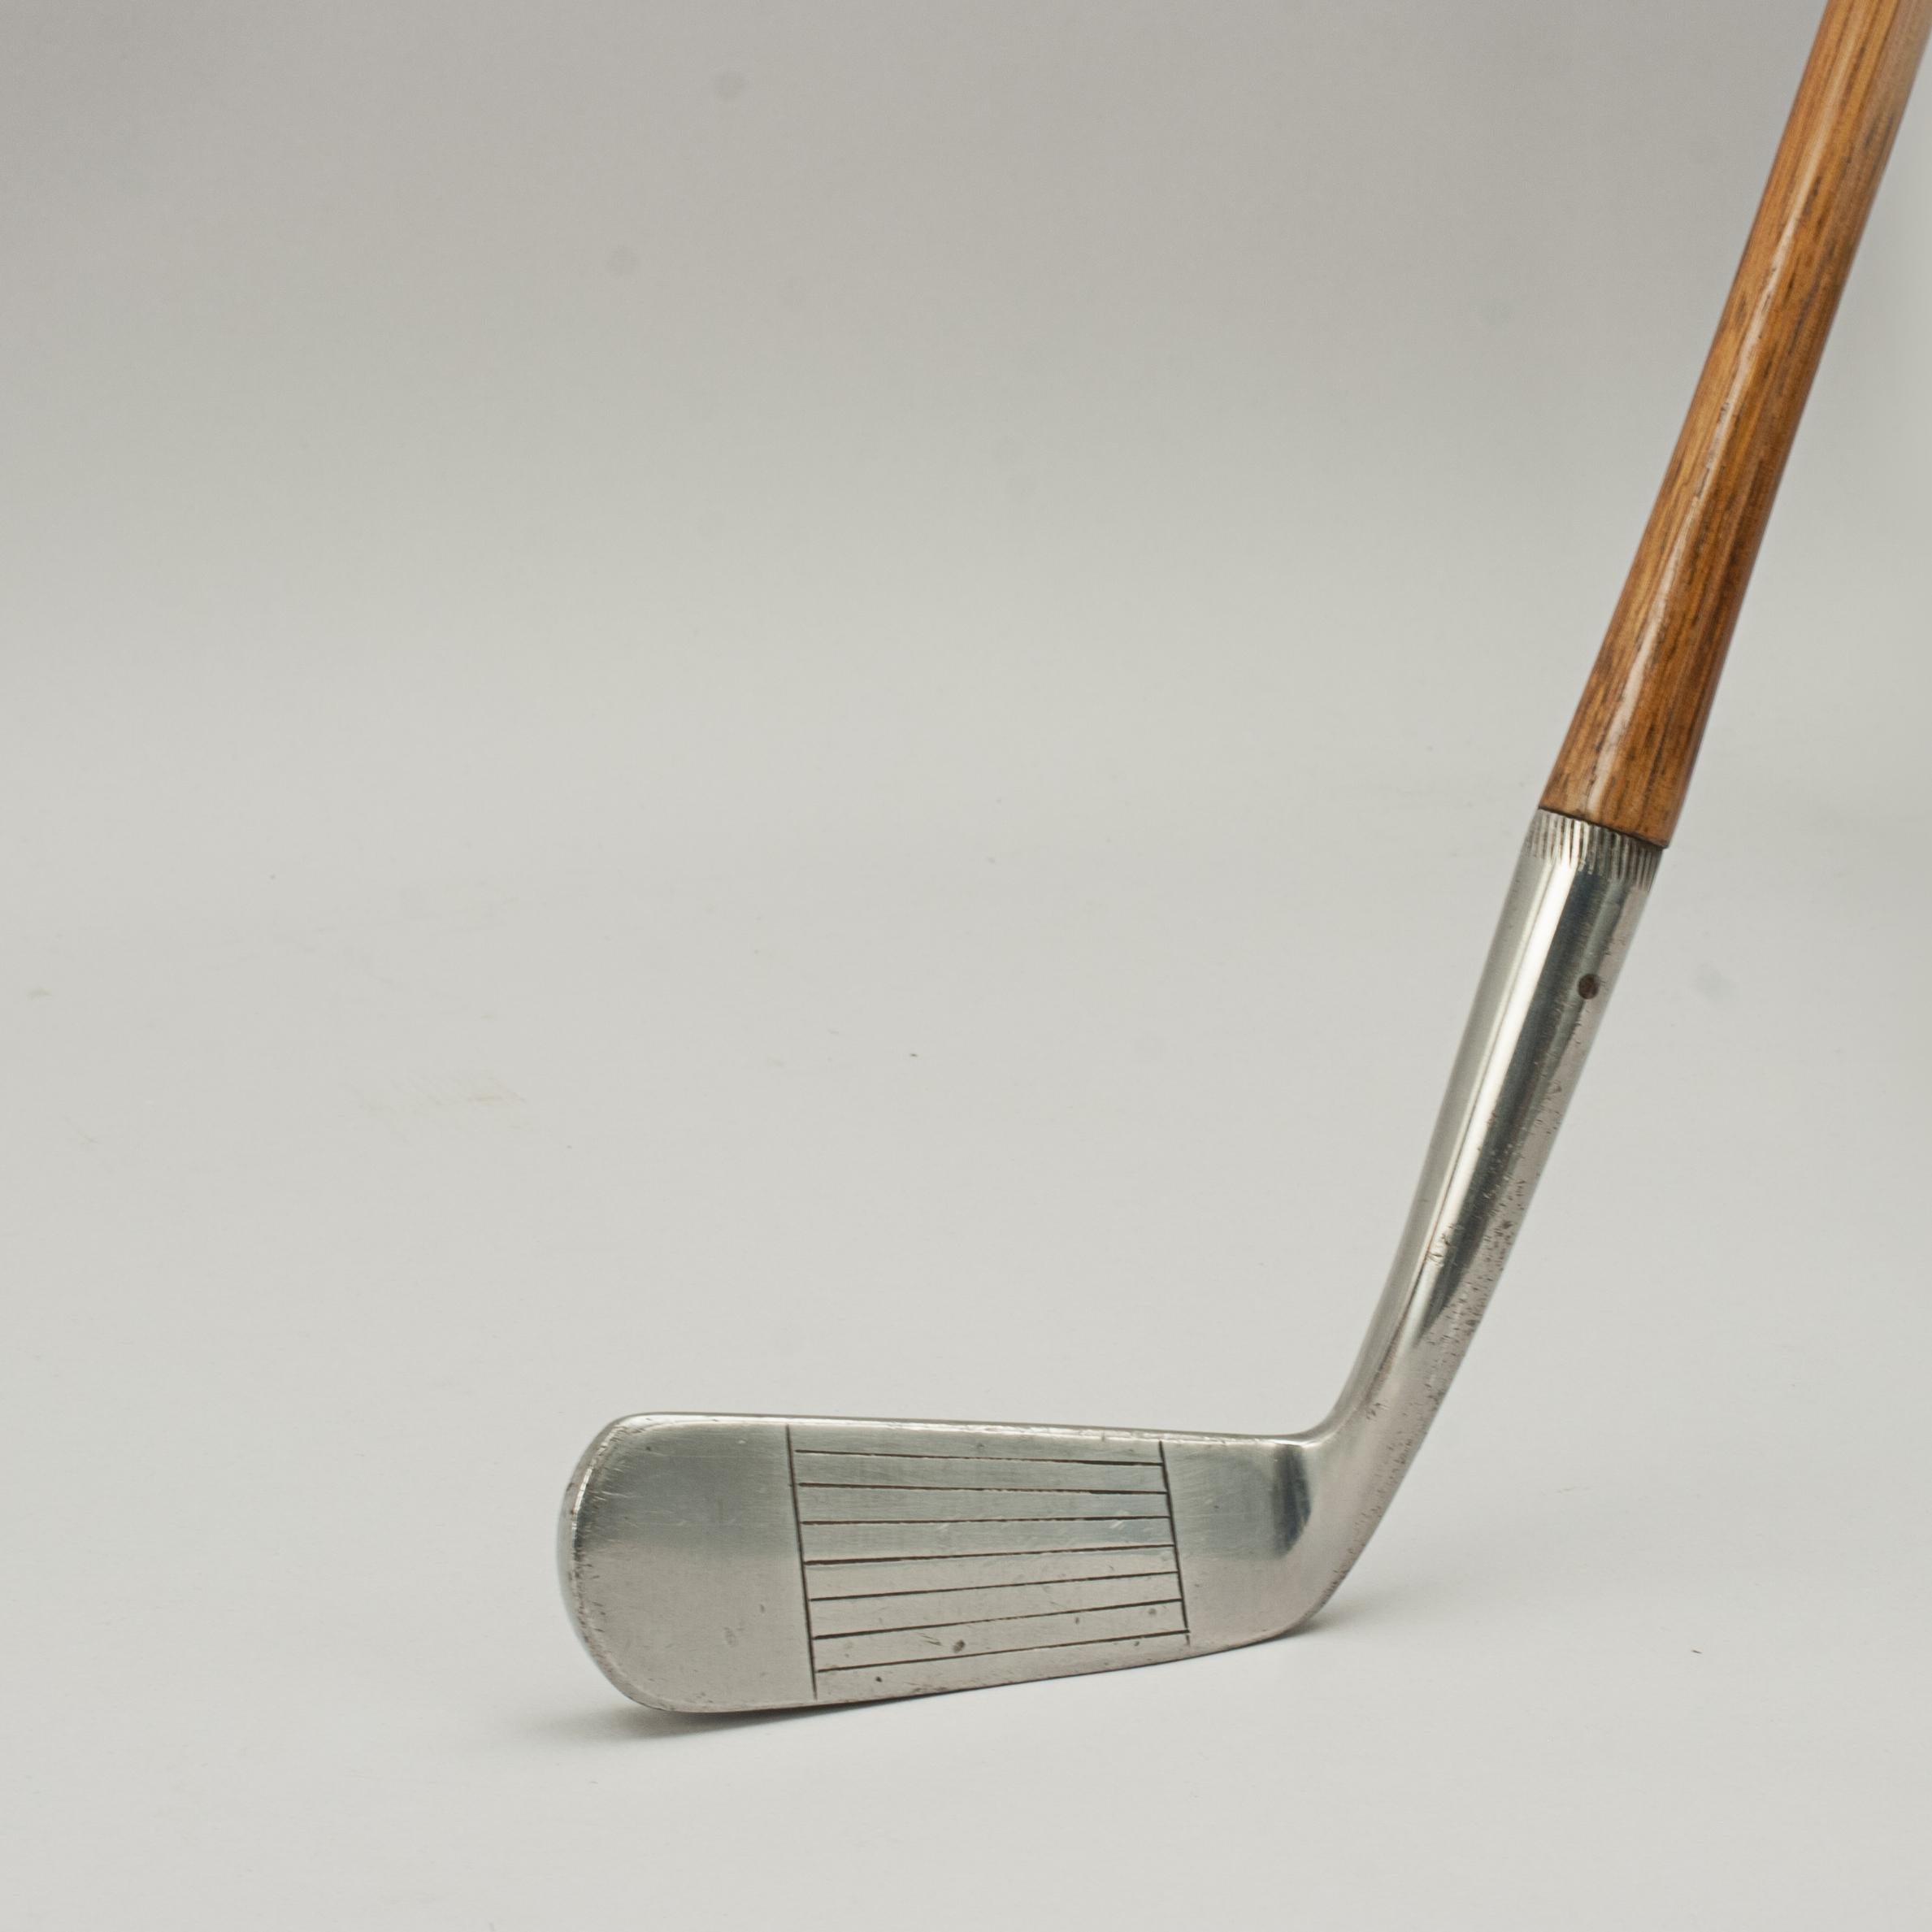 Vintage Hickory Golf Club, Wry Neck Putter, Spalding.
A fine and nicely weighted line faced offset putter, wryneck putter by A.G. Spalding & Bros. The hickory shaft with polished leather grip, the rear of the club head marked 'A.G. Spalding &